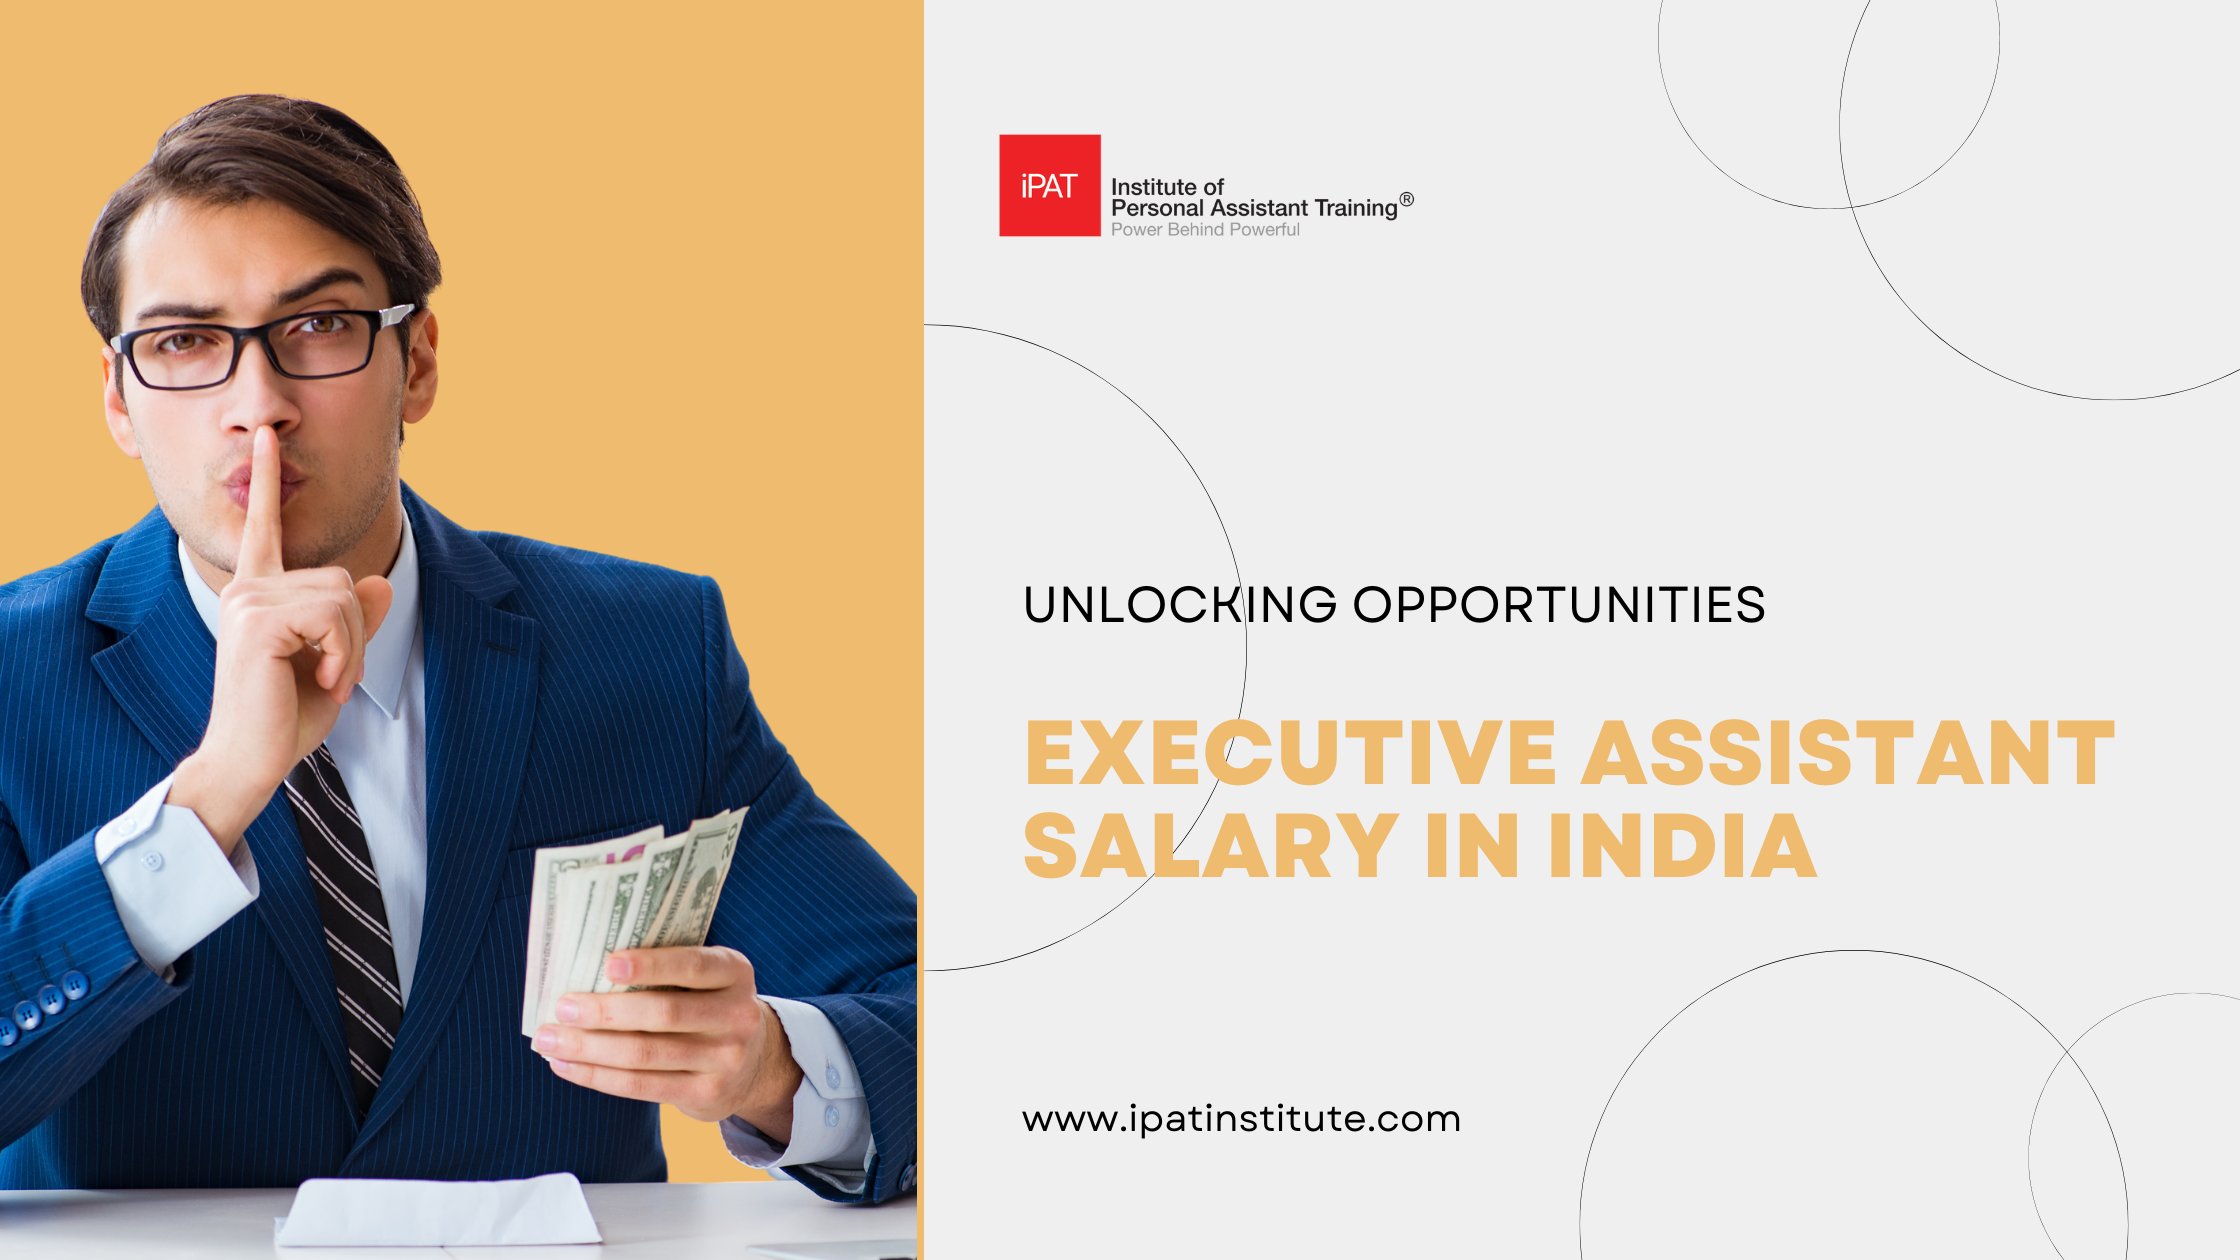 Executive Assistant Salary in India